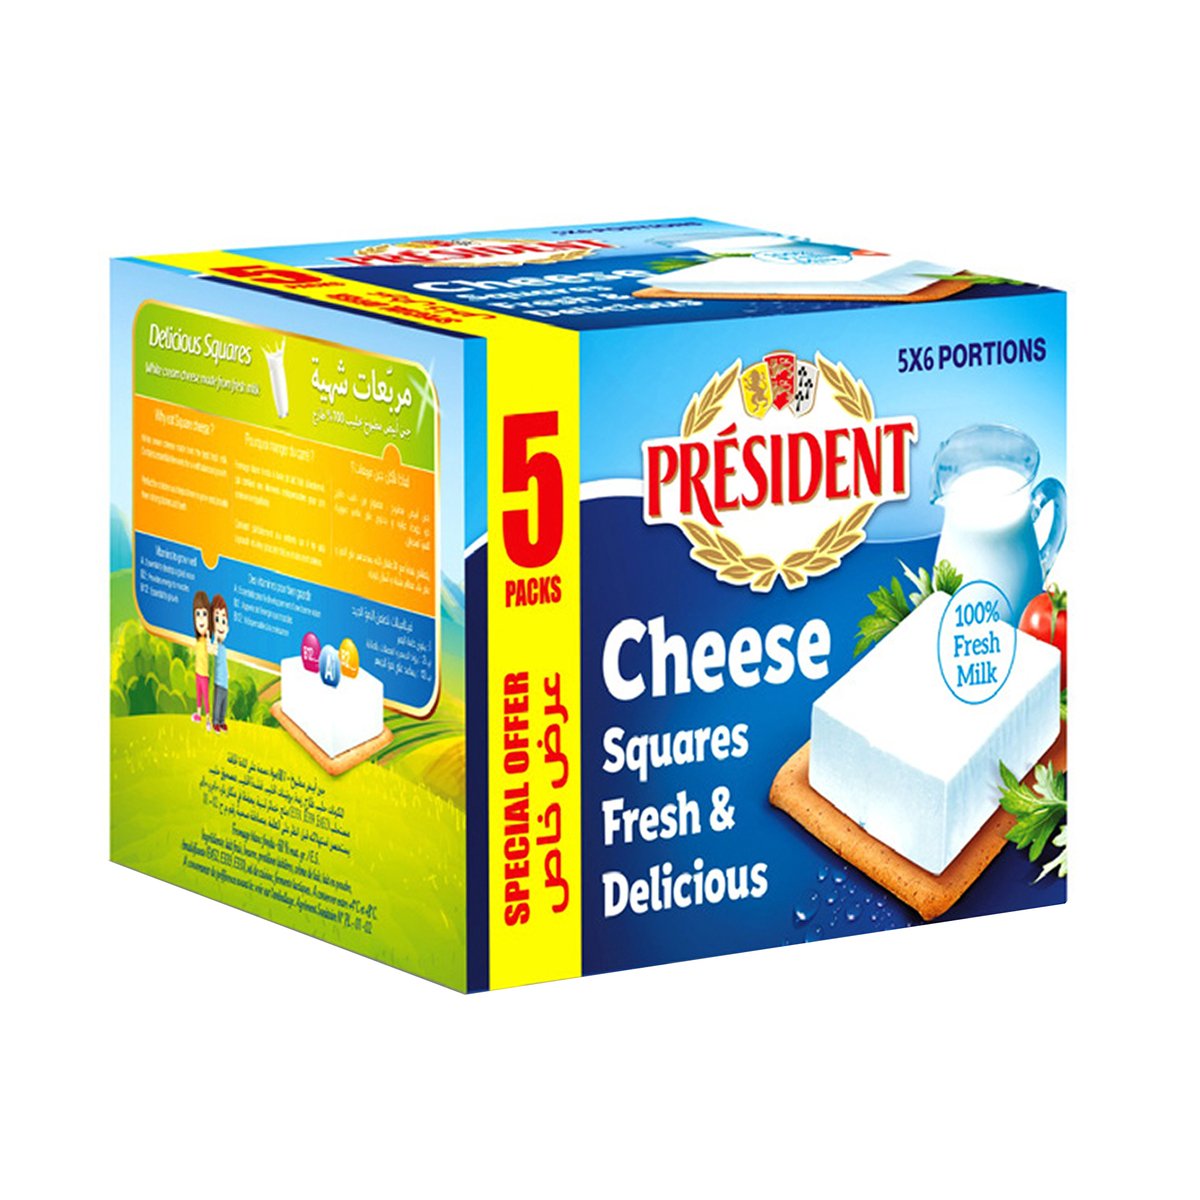 President Square Cheese Value Pack 5 x 6 Portions